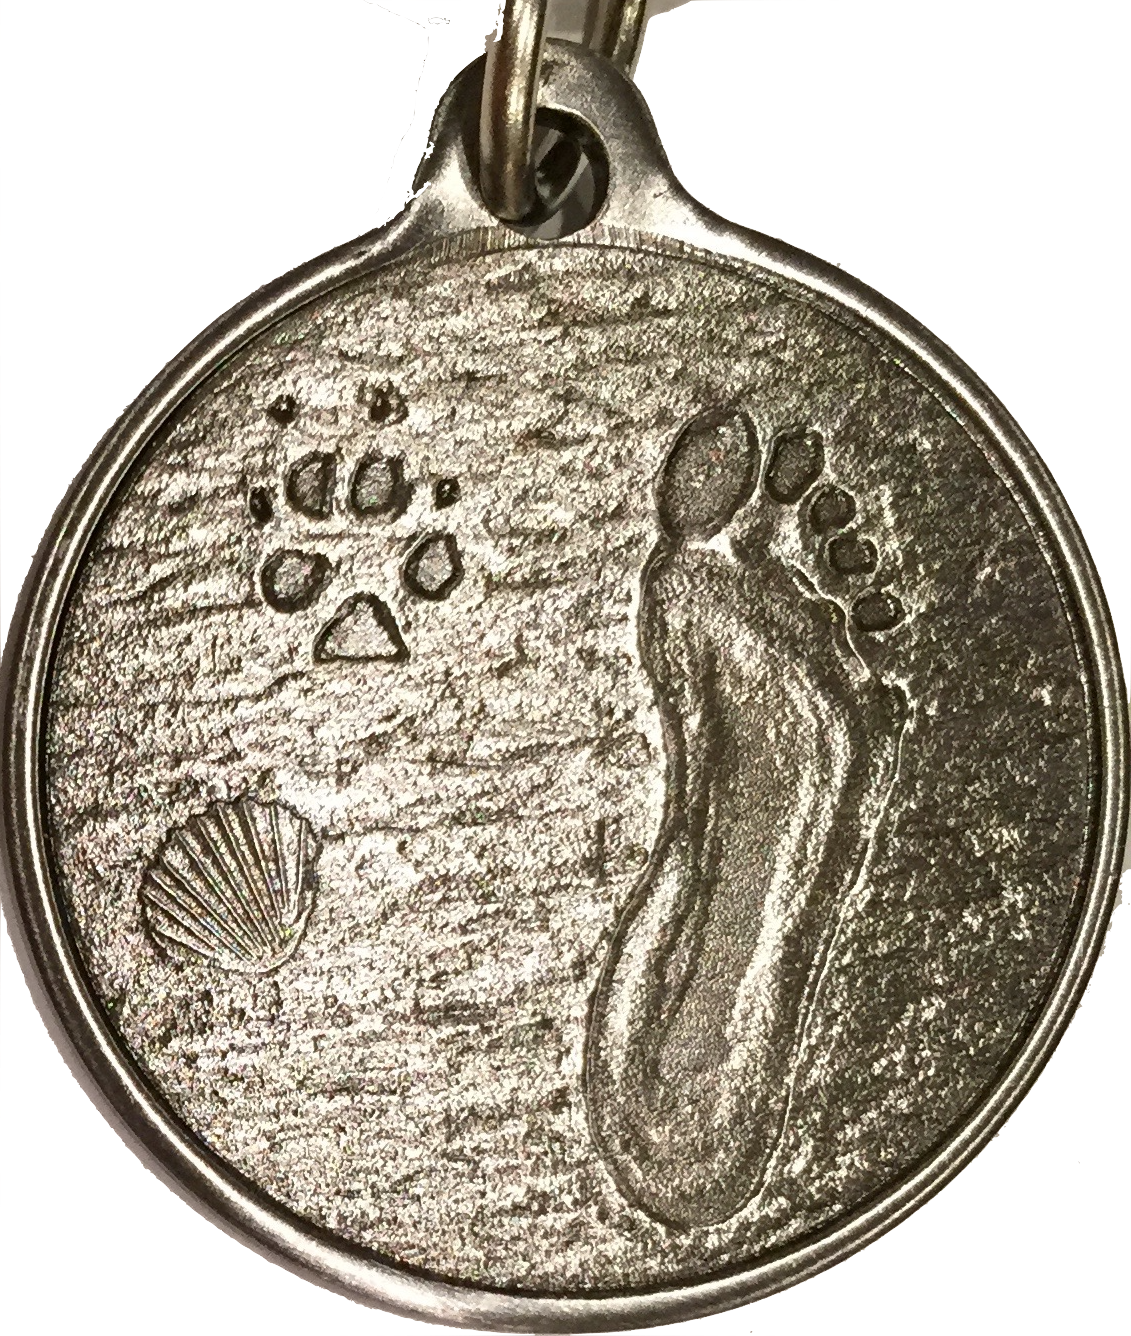 Always By My Side Dog Pet Paw Print Footprint Beach Pewter Color Keychain - RecoveryChip